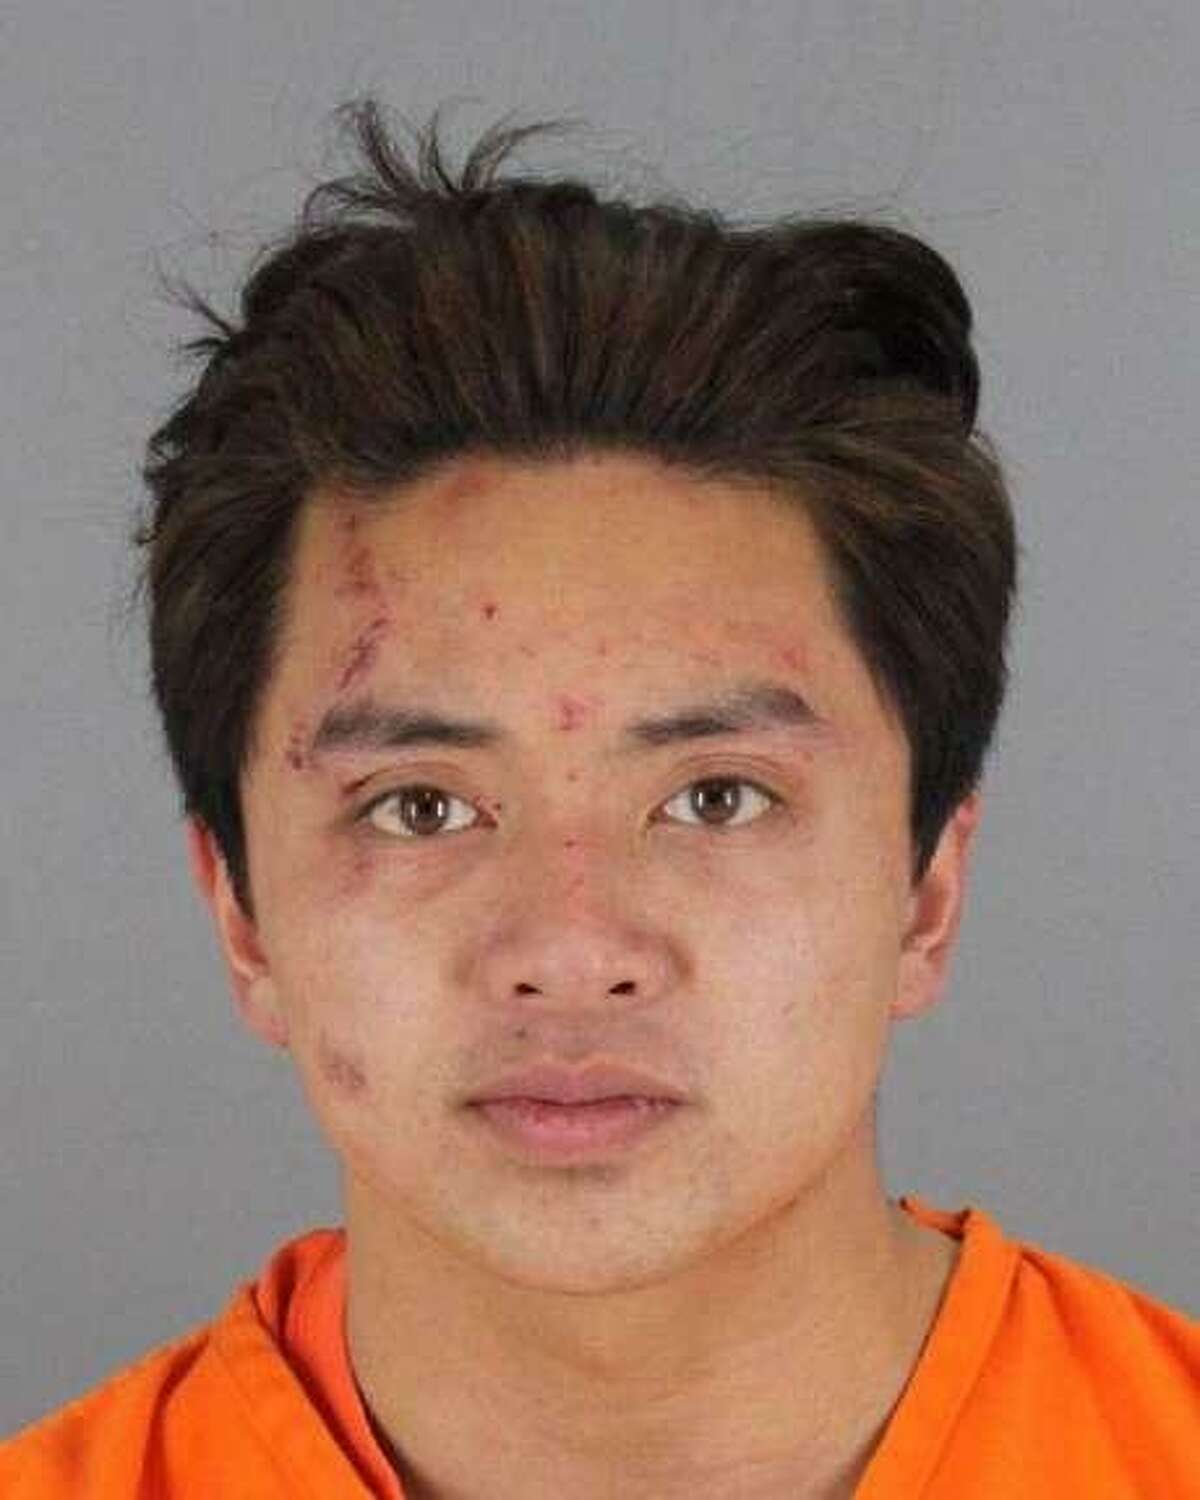 Frederick Tran, 25, of San Francisco, pleaded not guilty by reason of insanity in connection with the beating death of his girlfriend, prosecutors said.